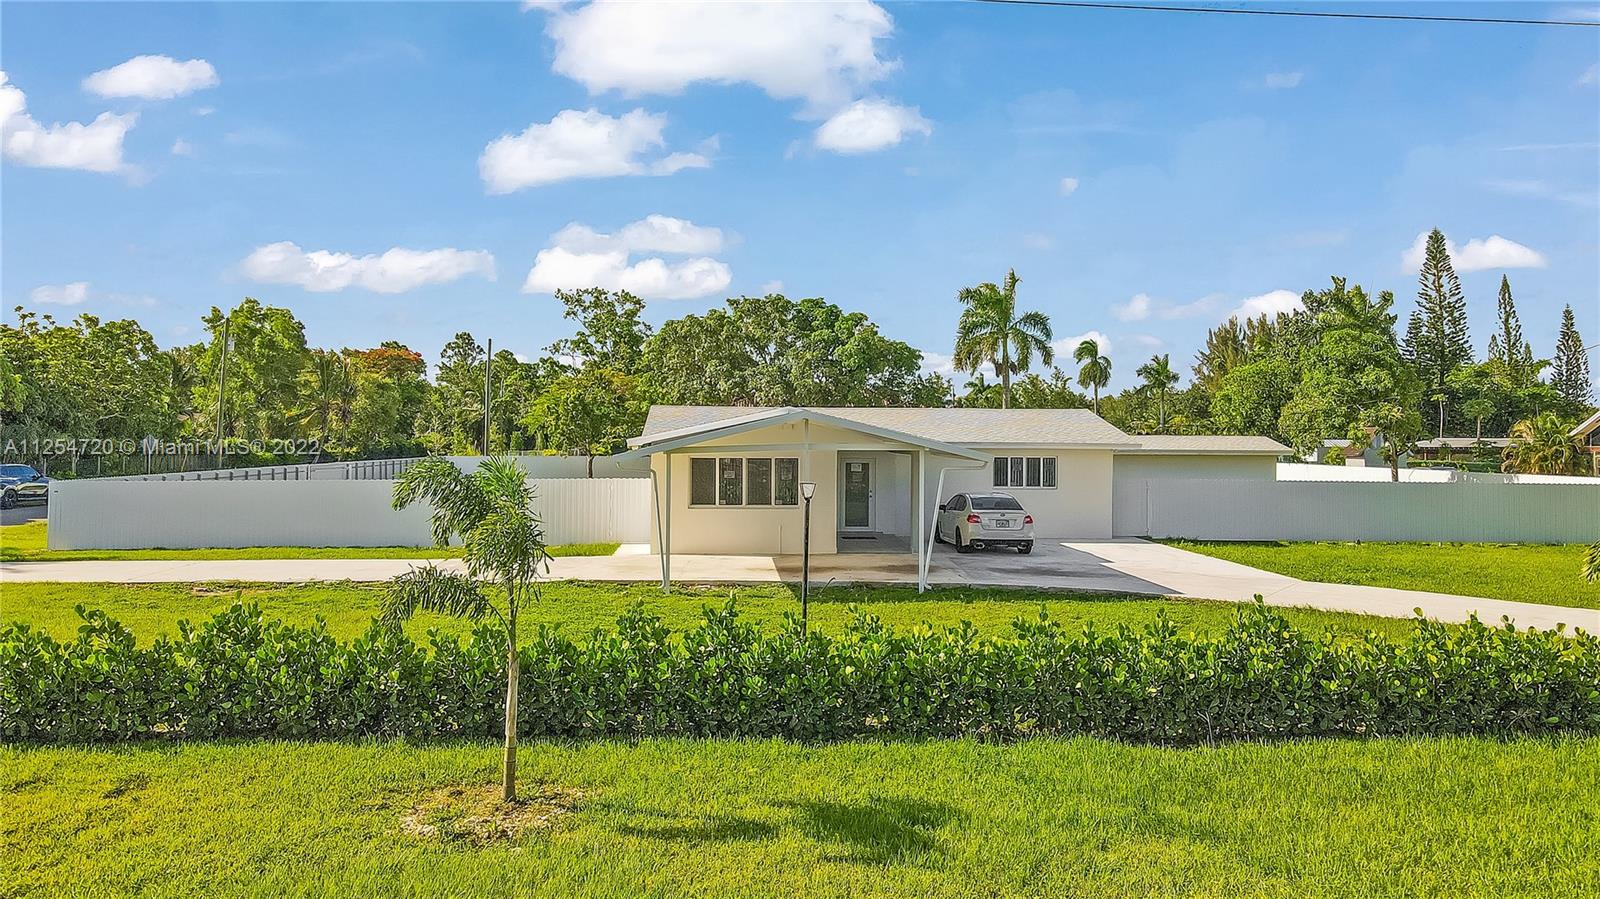 Move in ready! Located in the heart of Redland. Close to Krome Ave, schools and shopping centers. It is a 3/2 with Florida room (can be used as an extra room) with over a half of acre of land at your disposable. Can park Boats and RV's. Owner has renovated over $200,000. Optional it can be rented with furniture. Easy to show. The property in the back of the single family home is currently under renovations and will be rented separately.